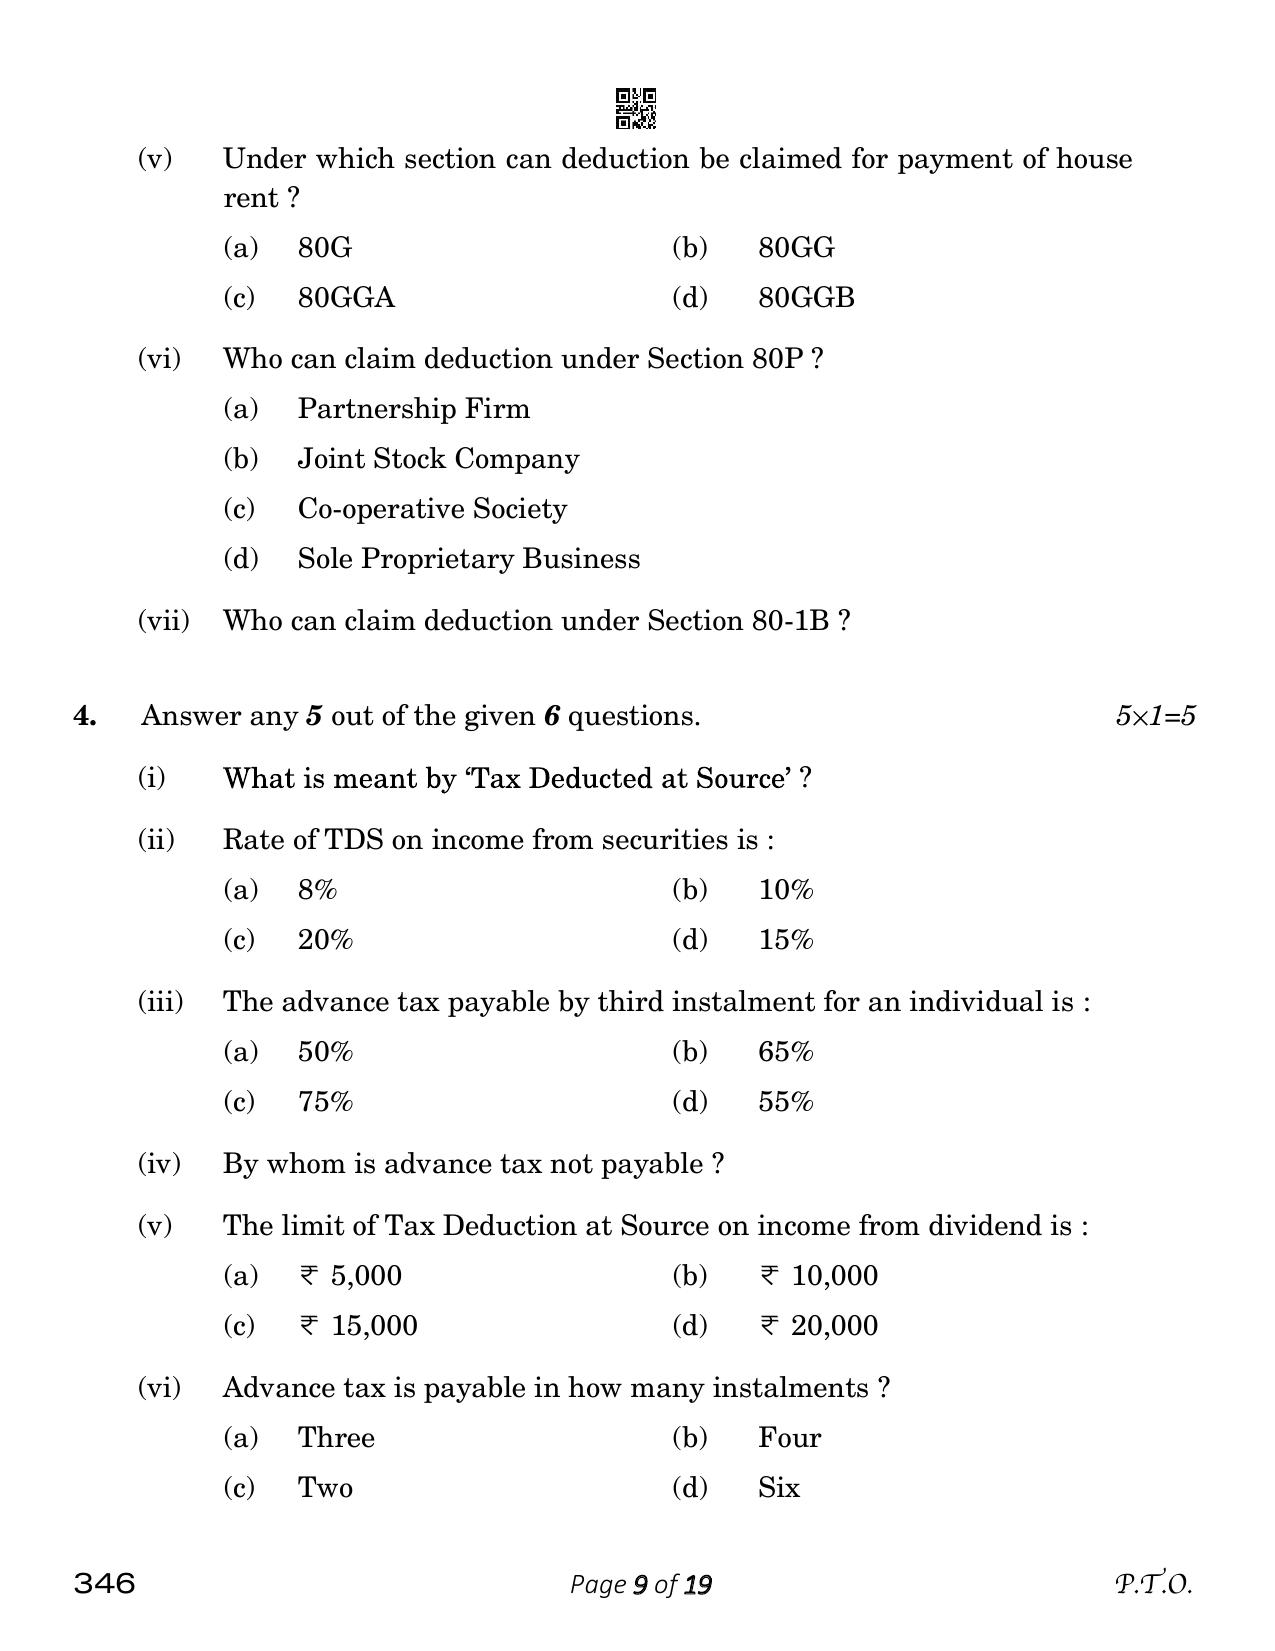 CBSE Class 12 Taxation (Compartment) 2023 Question Paper - Page 9